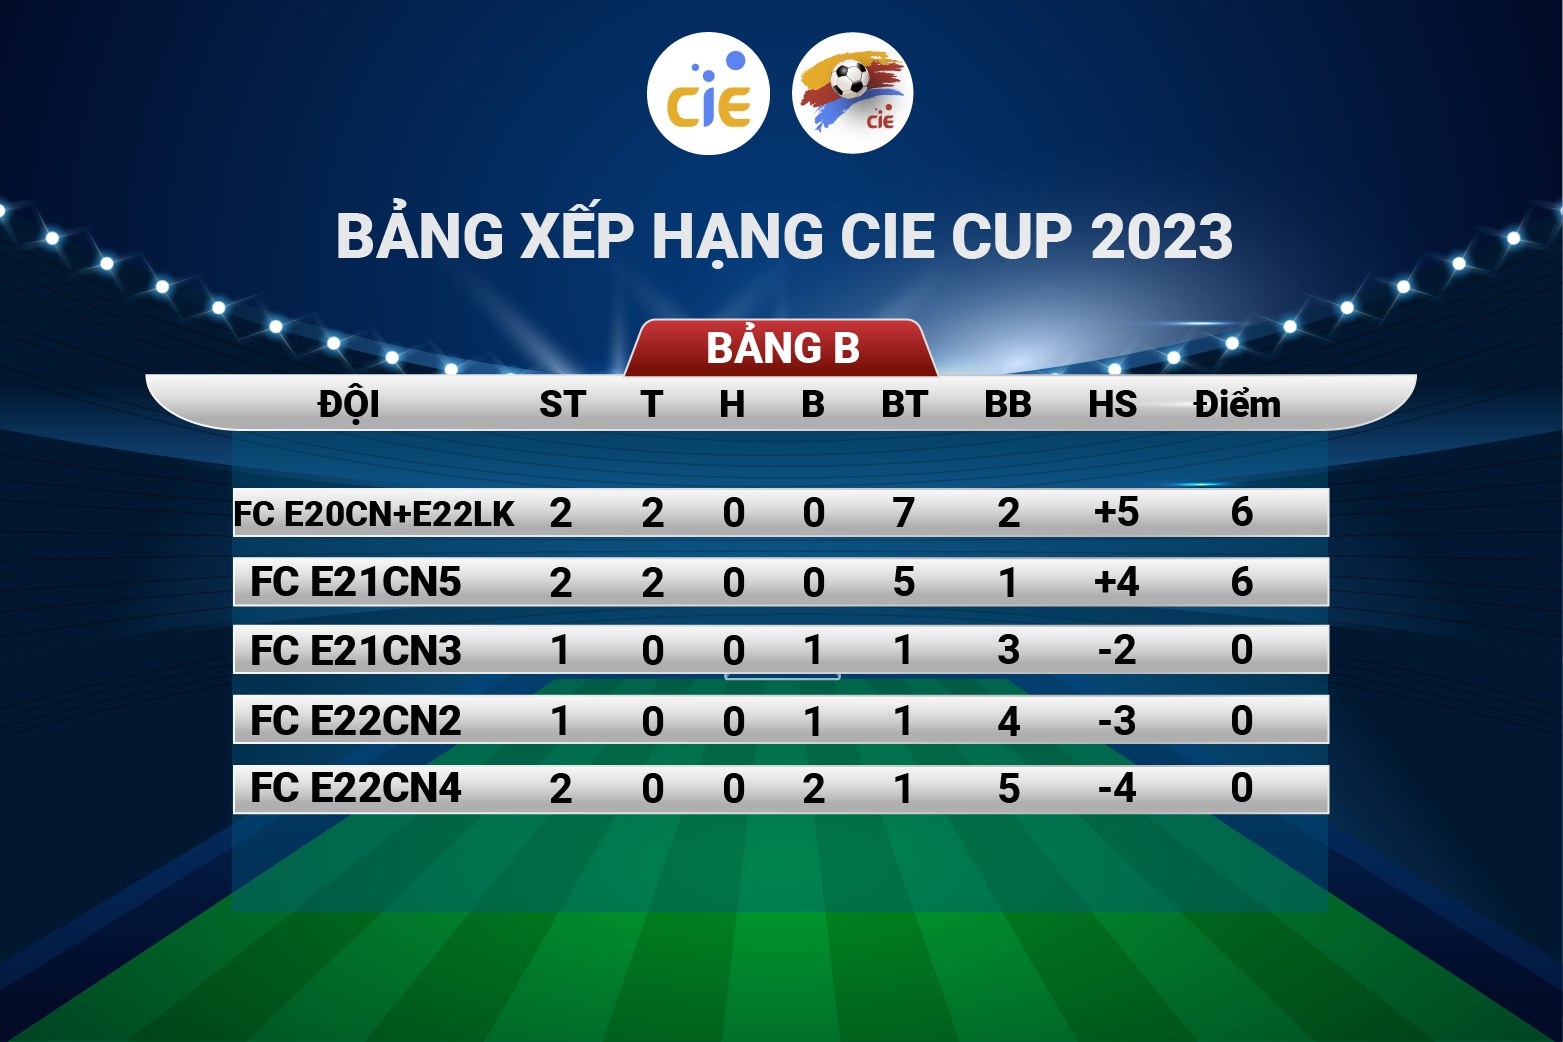 CIE CUP 2023 Rankings of table B